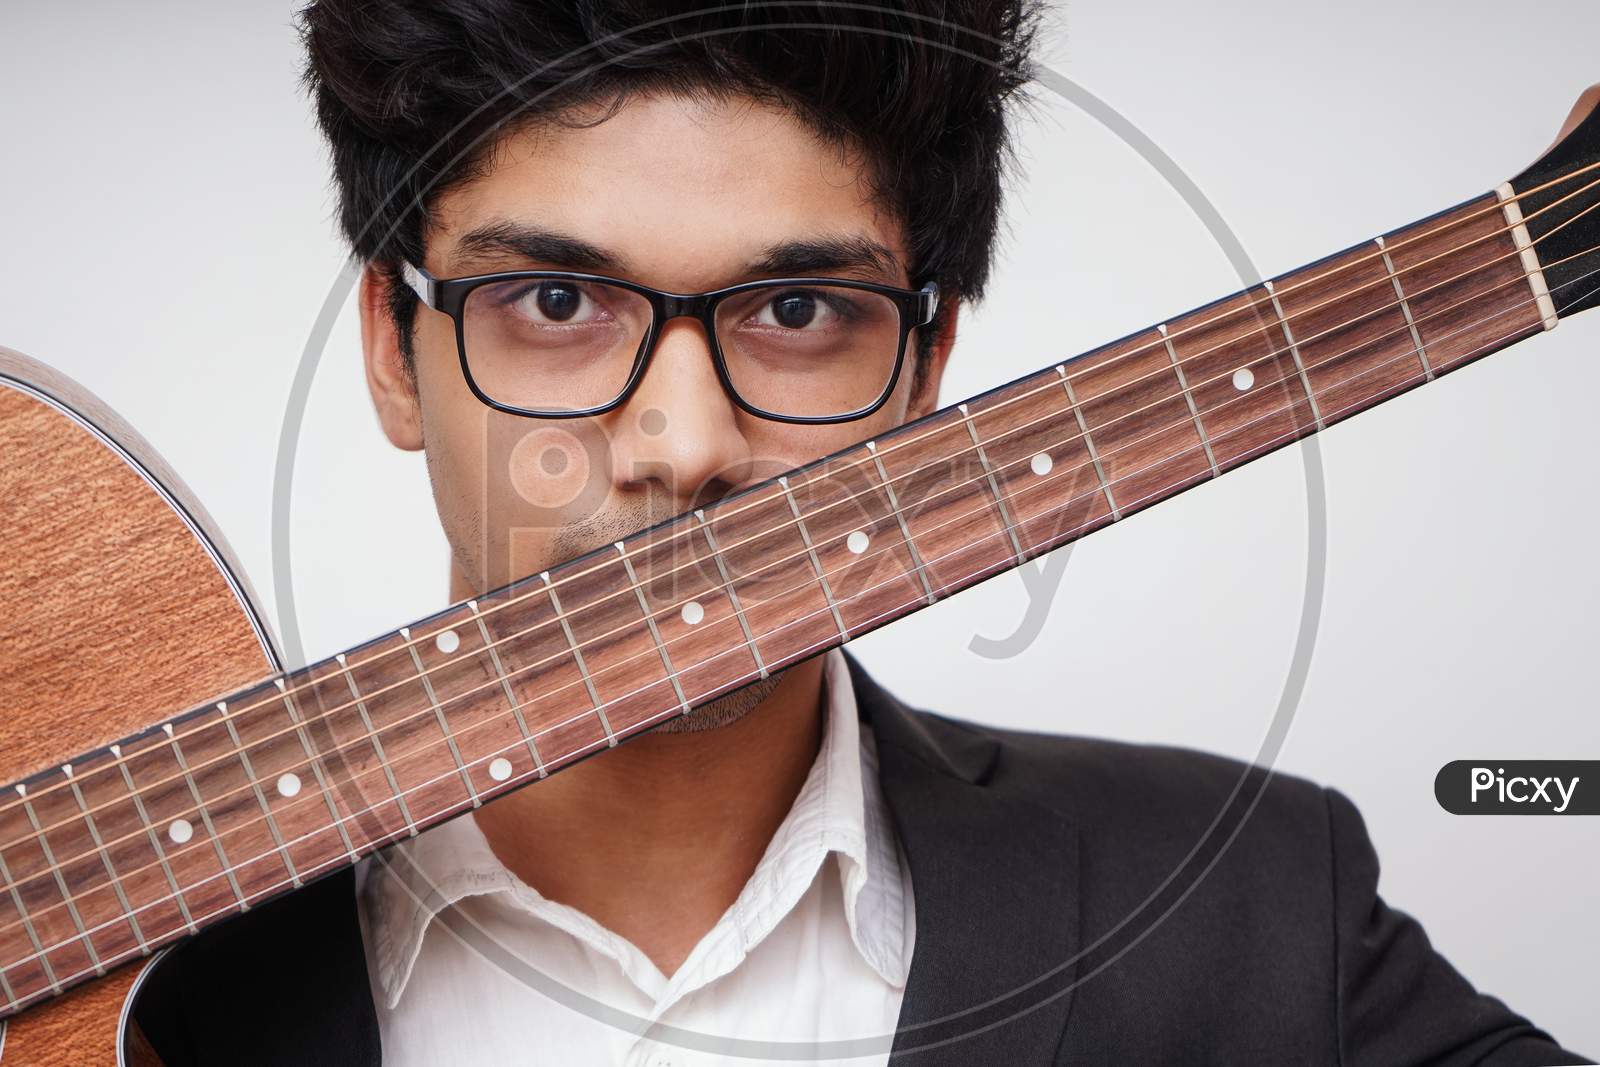 Close Up Of Young Handsome Asian Boy Wearing Formal And Specs Holding A Guitar In Front Of His Face